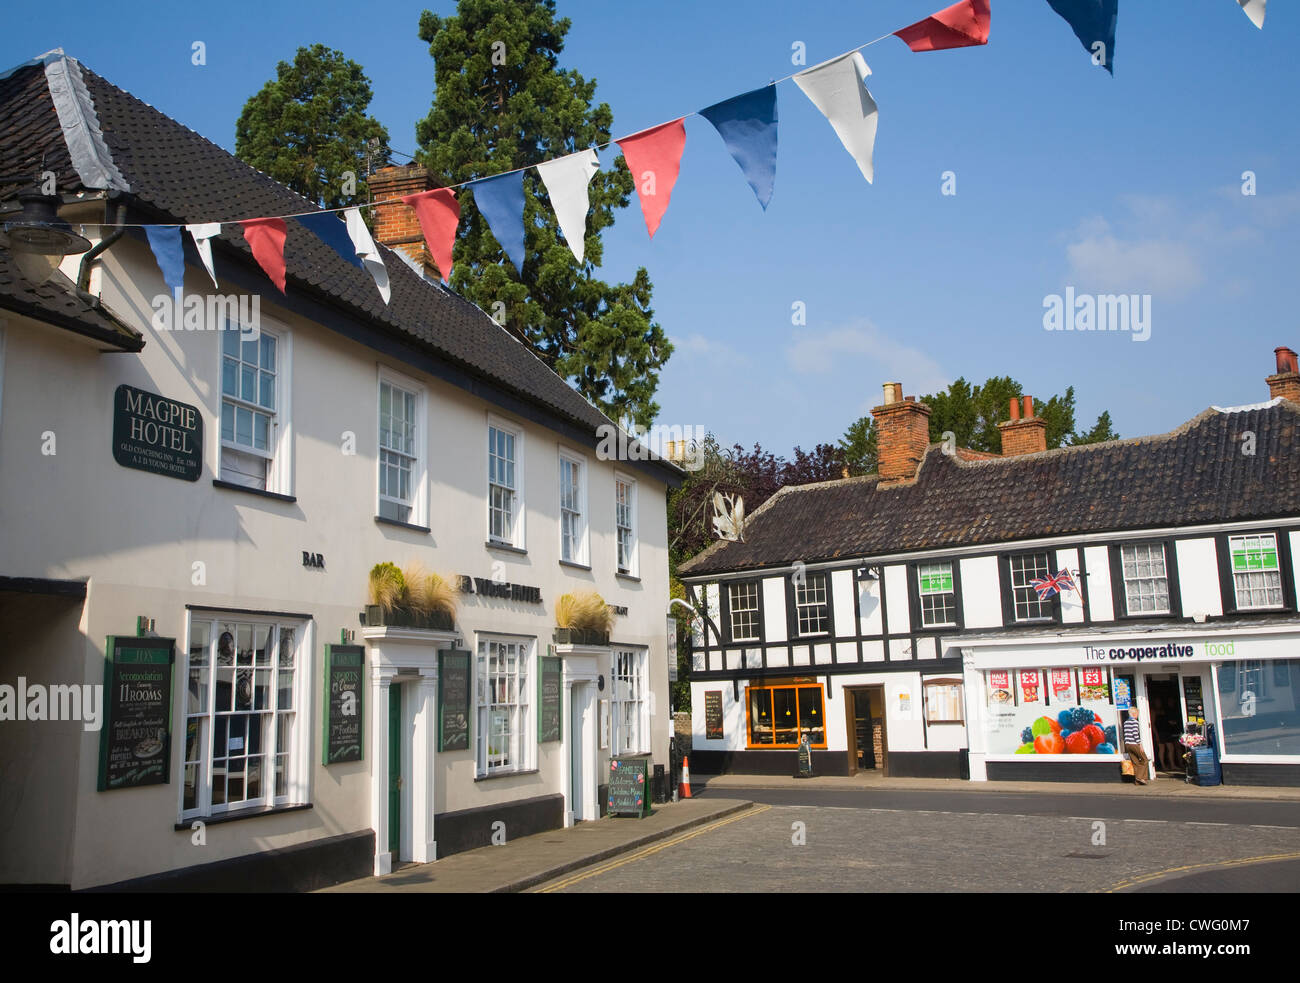 Magpie hotel and shops in the market square Harleston Norfolk England Stock Photo